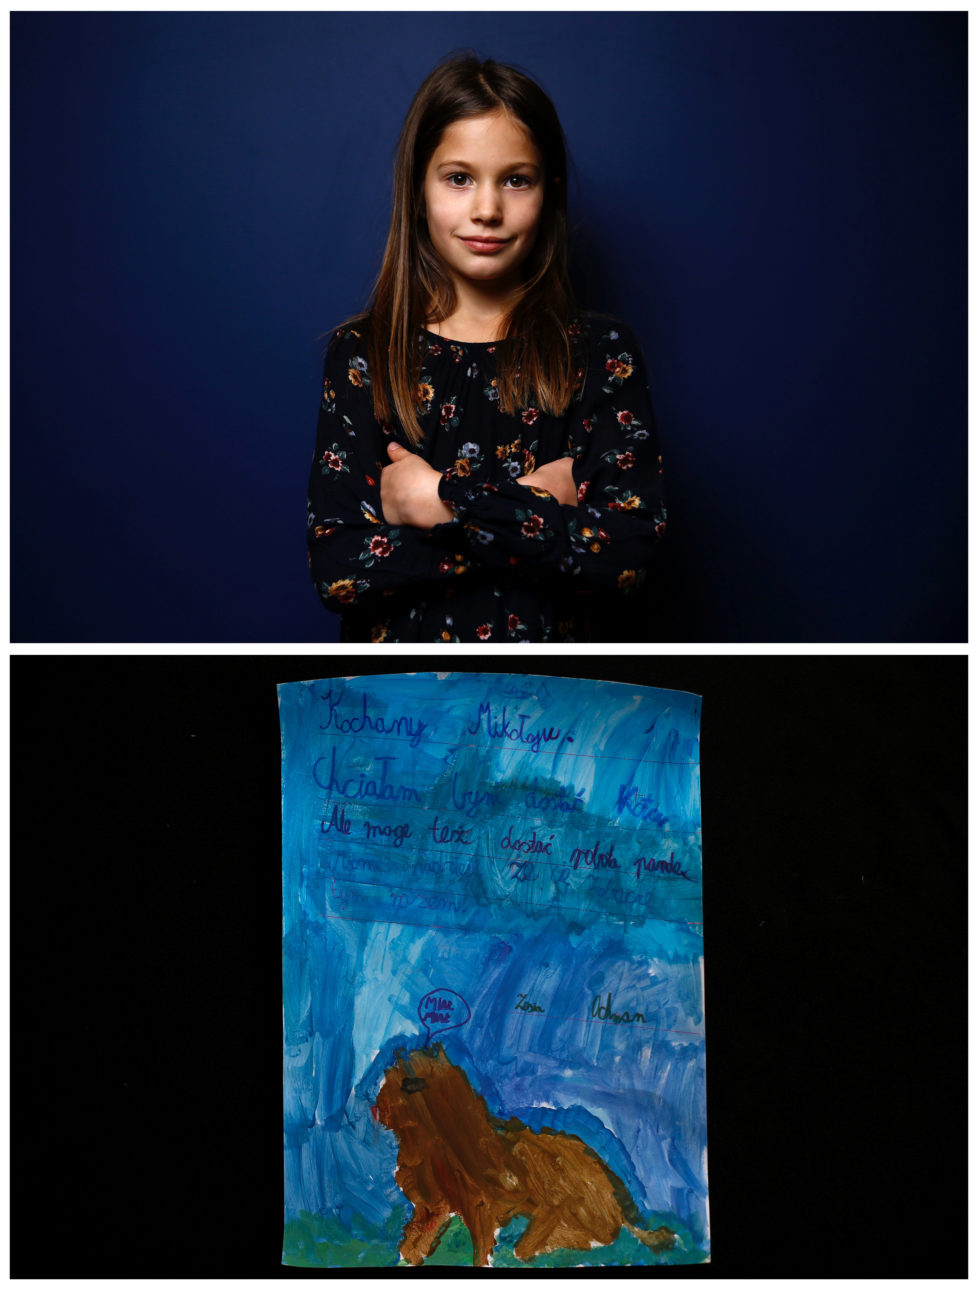 A combination picture shows Zofia, 8, posing for a photograph November 23, 2016 (top) and her drawing of what she wants to get for Christmas from Santa, in Warsaw, Poland November 24, 2016. "Dear Santa, I would like to get a cat. But a Robopanda would be ok too. I hope to see you this time. Zosia." she wrote. Reuters photographers around the world asked children to draw what they wanted to receive from Santa for Christmas. REUTERS/Kacper Pempel SEARCH "CHRISTMAS WISHES" FOR THIS STORY. SEARCH "WIDER IMAGE" FOR ALL STORIES. TPX IMAGES OF THE DAY. - RTSV37I